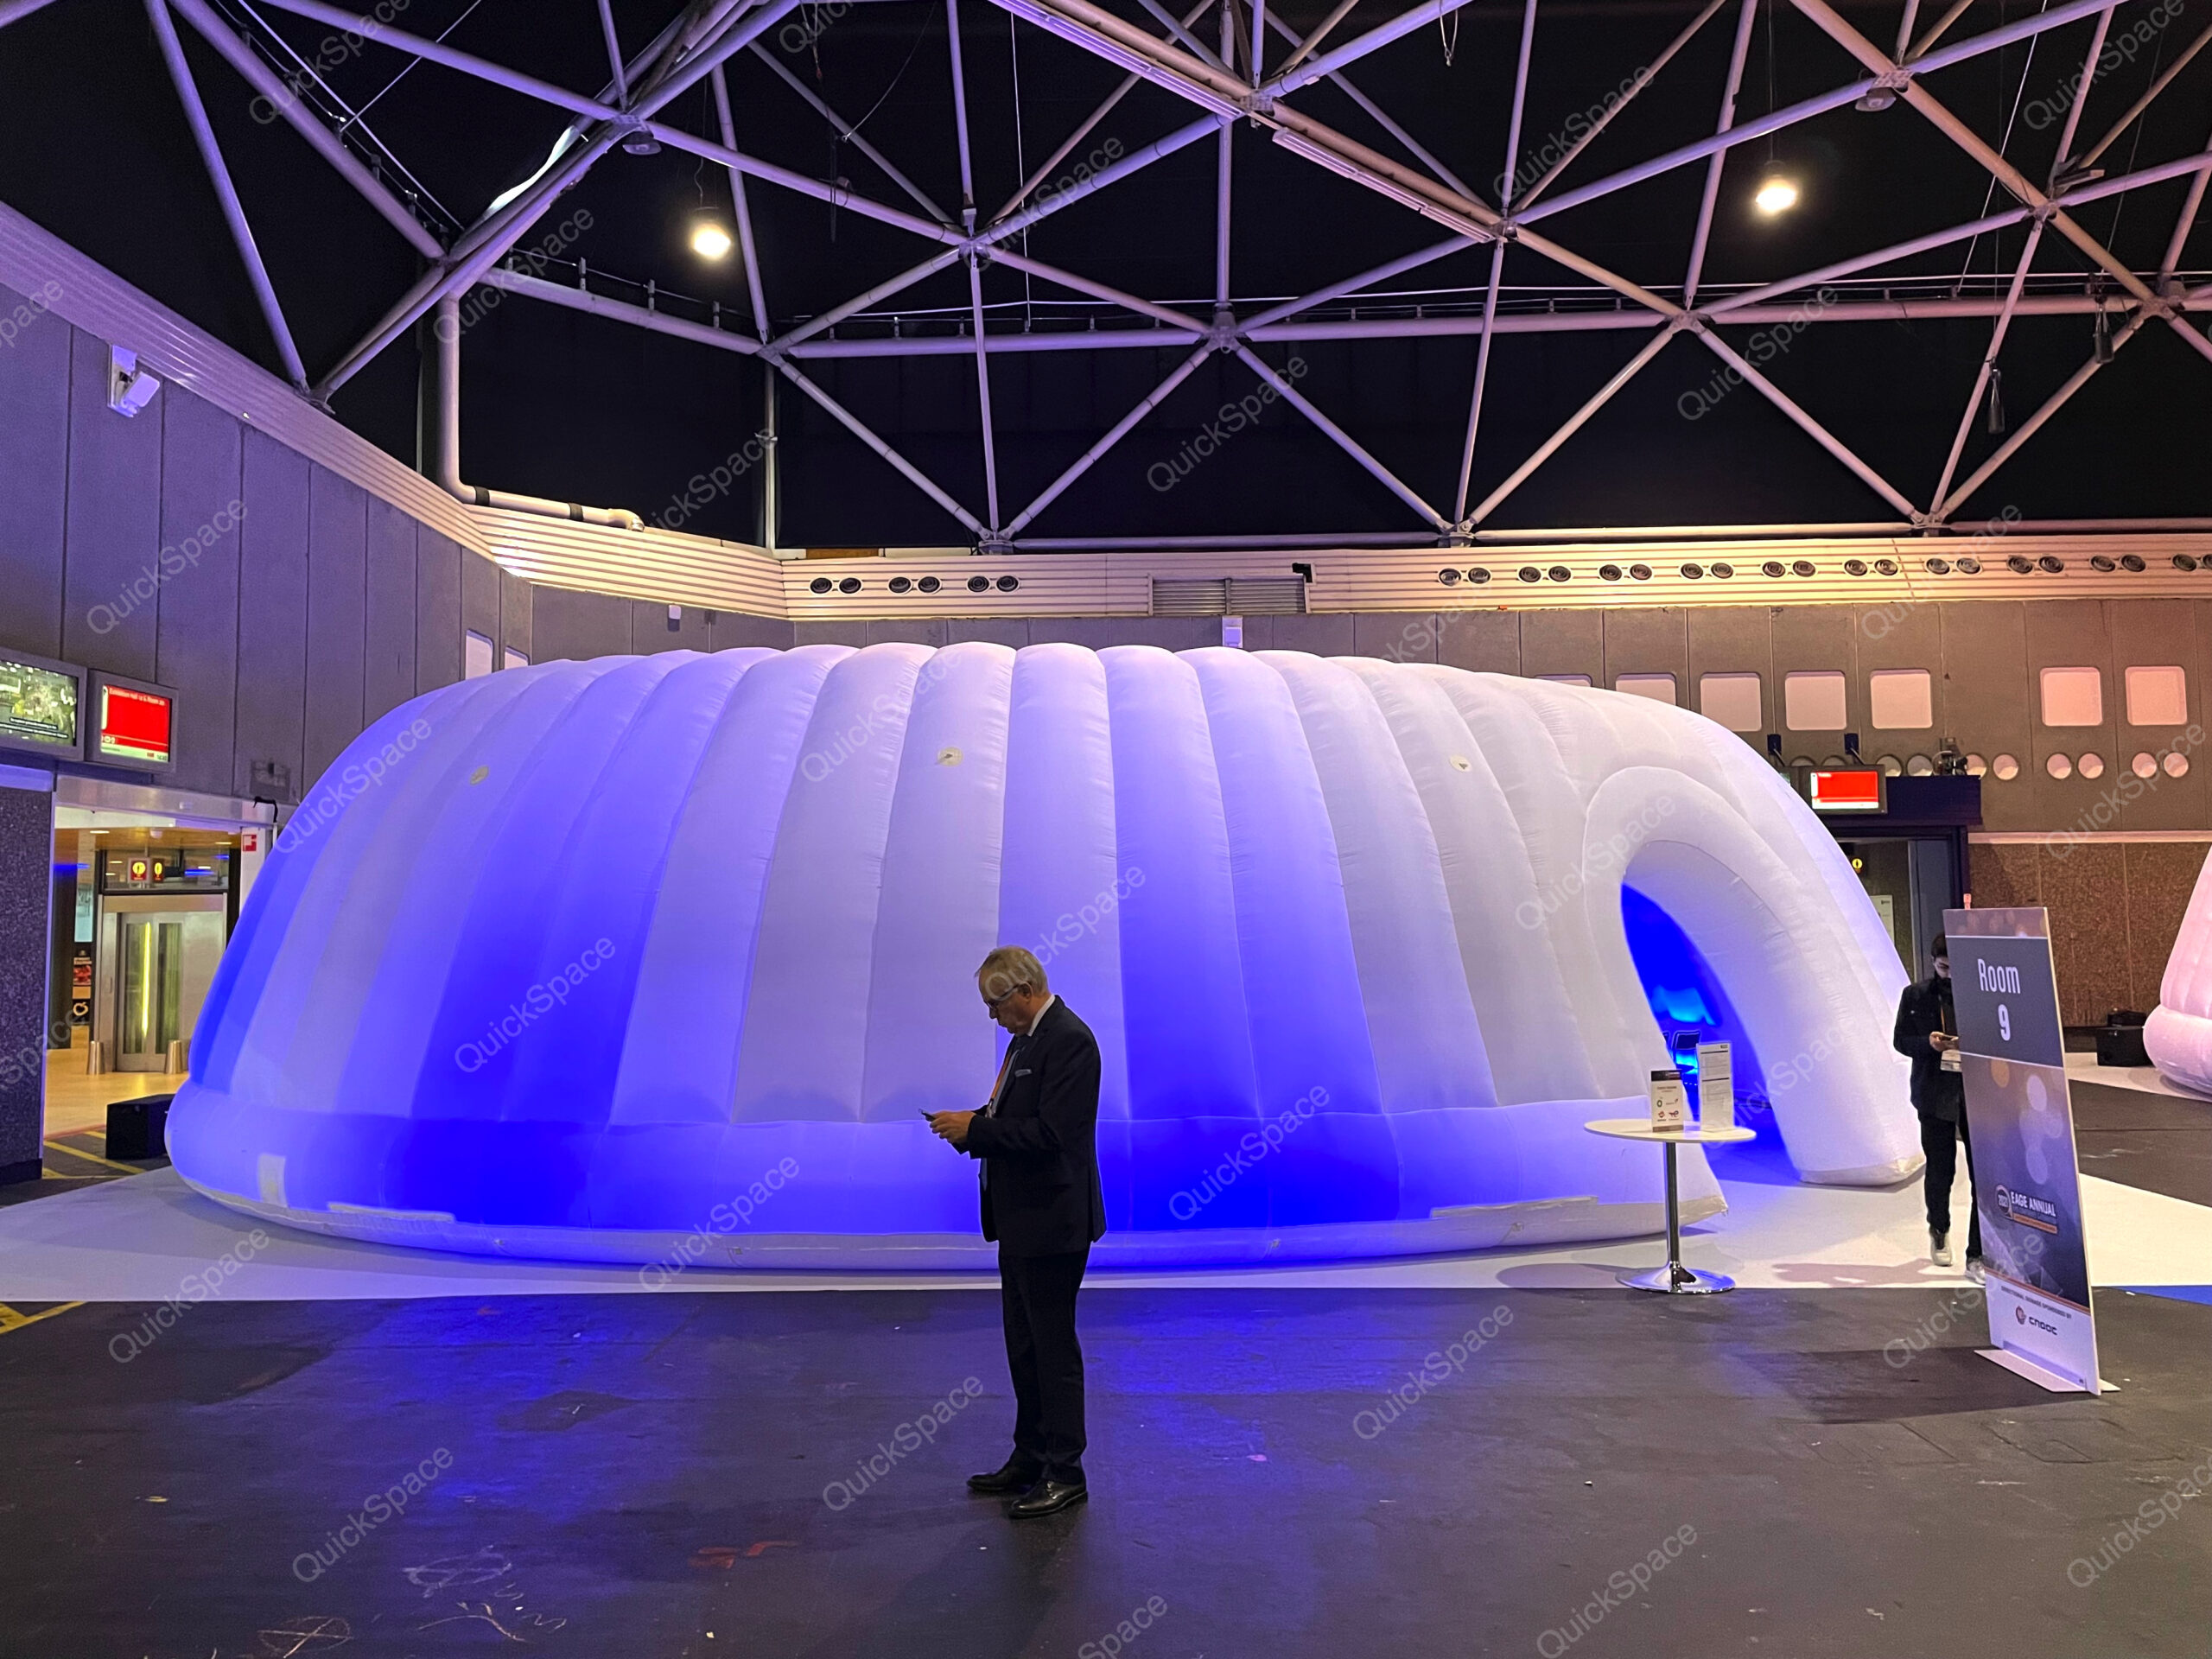 Dome Tent at Event